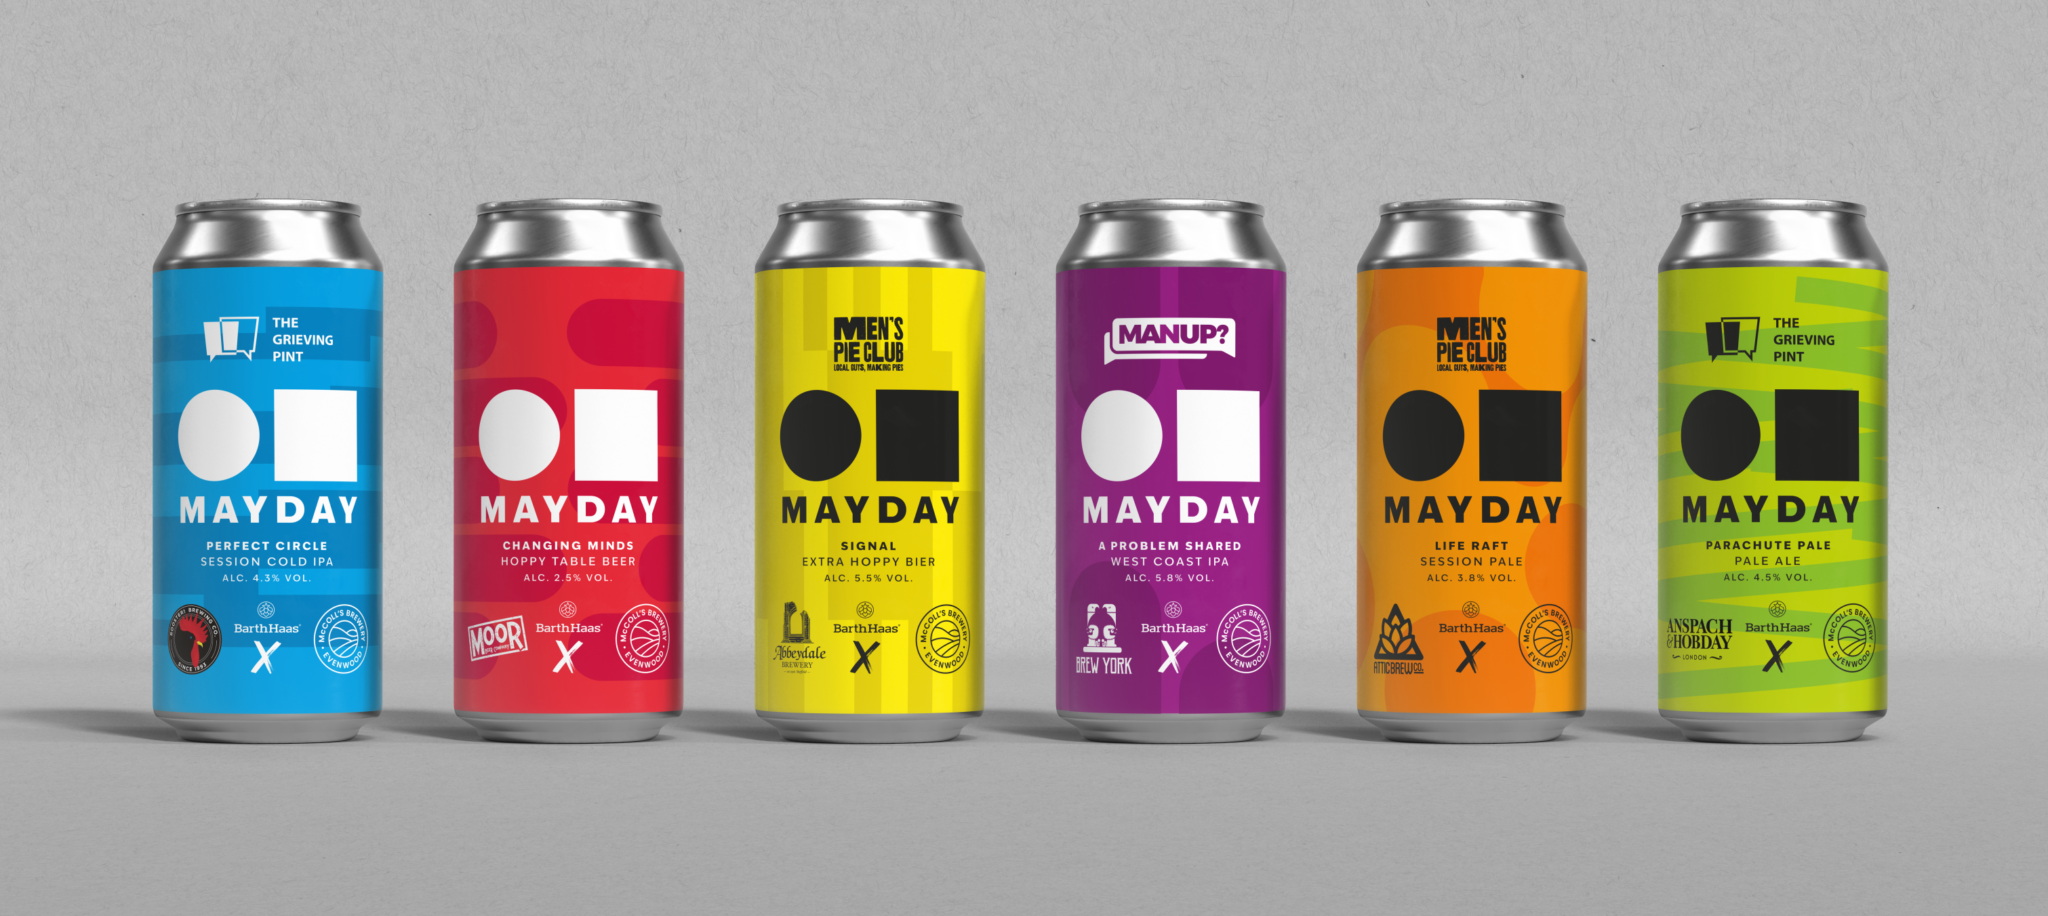 MAYDAY: McColl’s Brewery’s Latest Project for Men’s Mental Health